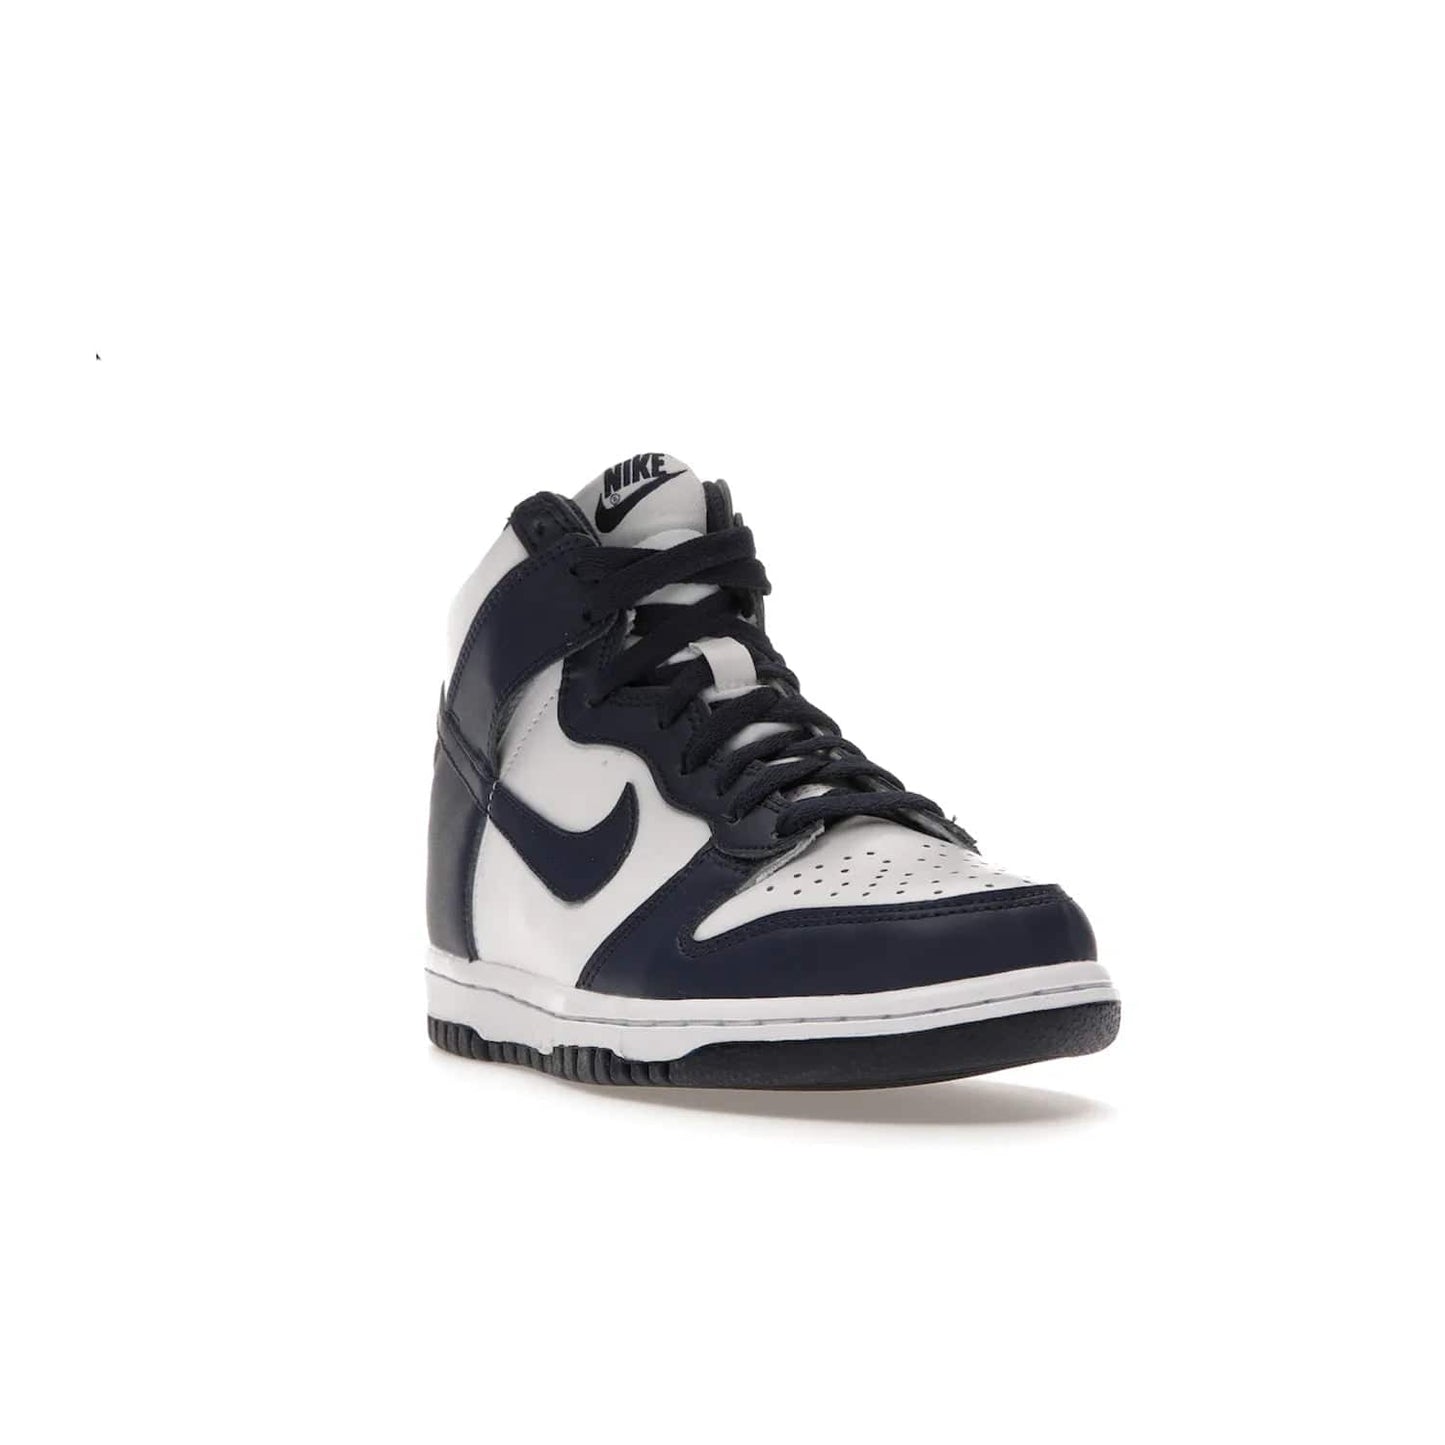 Nike Dunk High Championship Navy (GS) - Image 7 - Only at www.BallersClubKickz.com - Nike Dunk High Championship Navy GS: classic leather, suede, synthetic upper, chunky midsole, rubber herringbone sole. White base overlaid with Midnight Navy for a stylish finish. Padded high-cut collar and signature Nike swoosh design. Step out in these shoes and make a statement. Comfort and style at its finest.